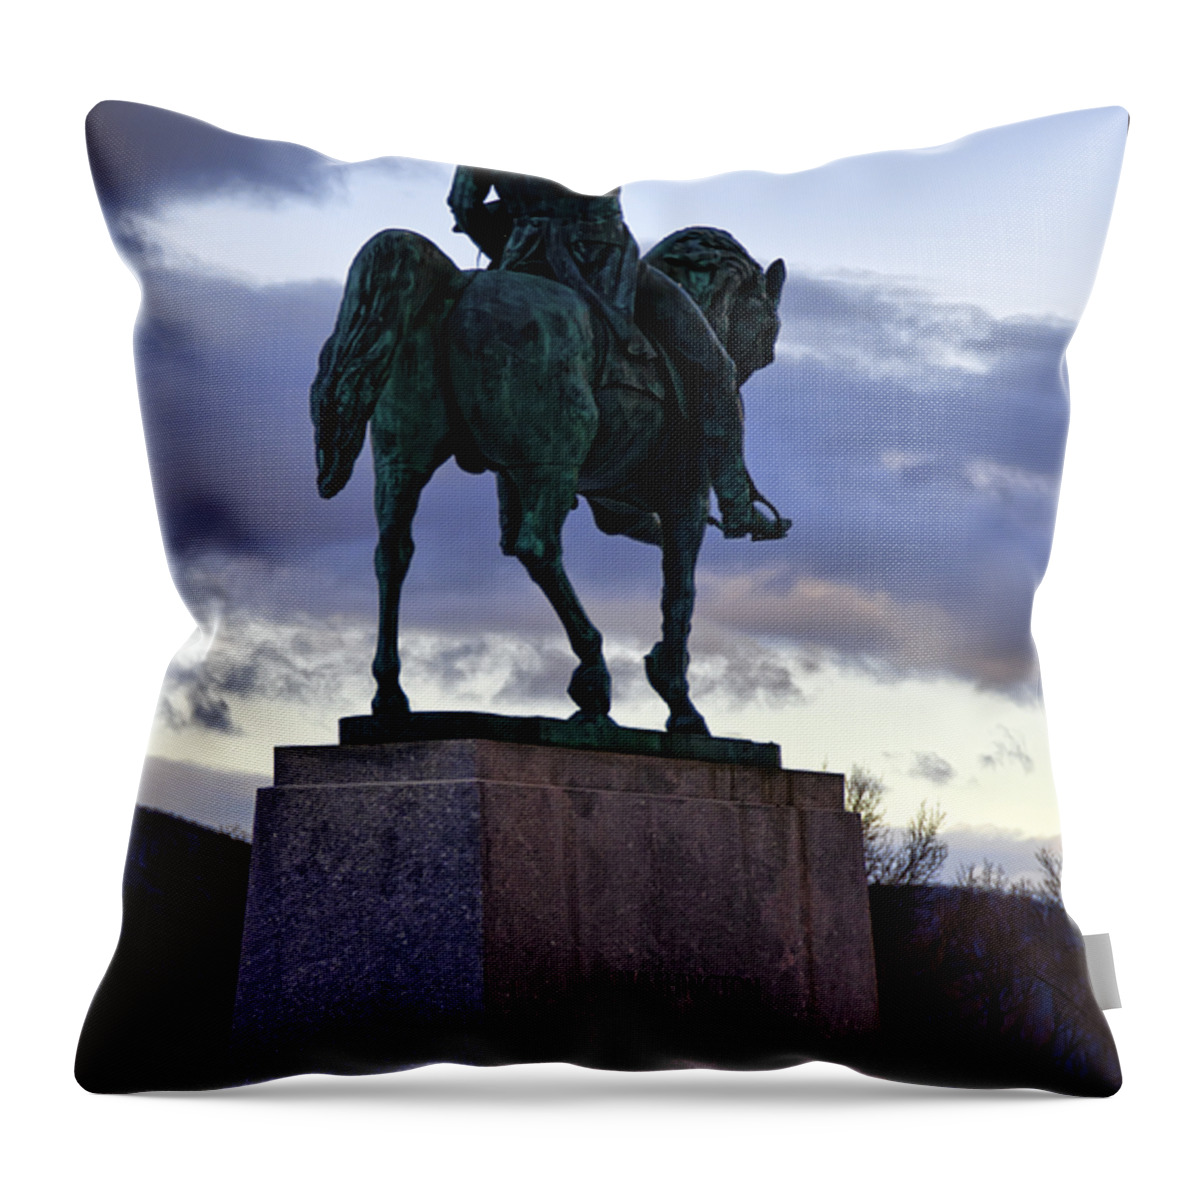 West Point Throw Pillow featuring the photograph Washington Monument at West Point by Dan McManus